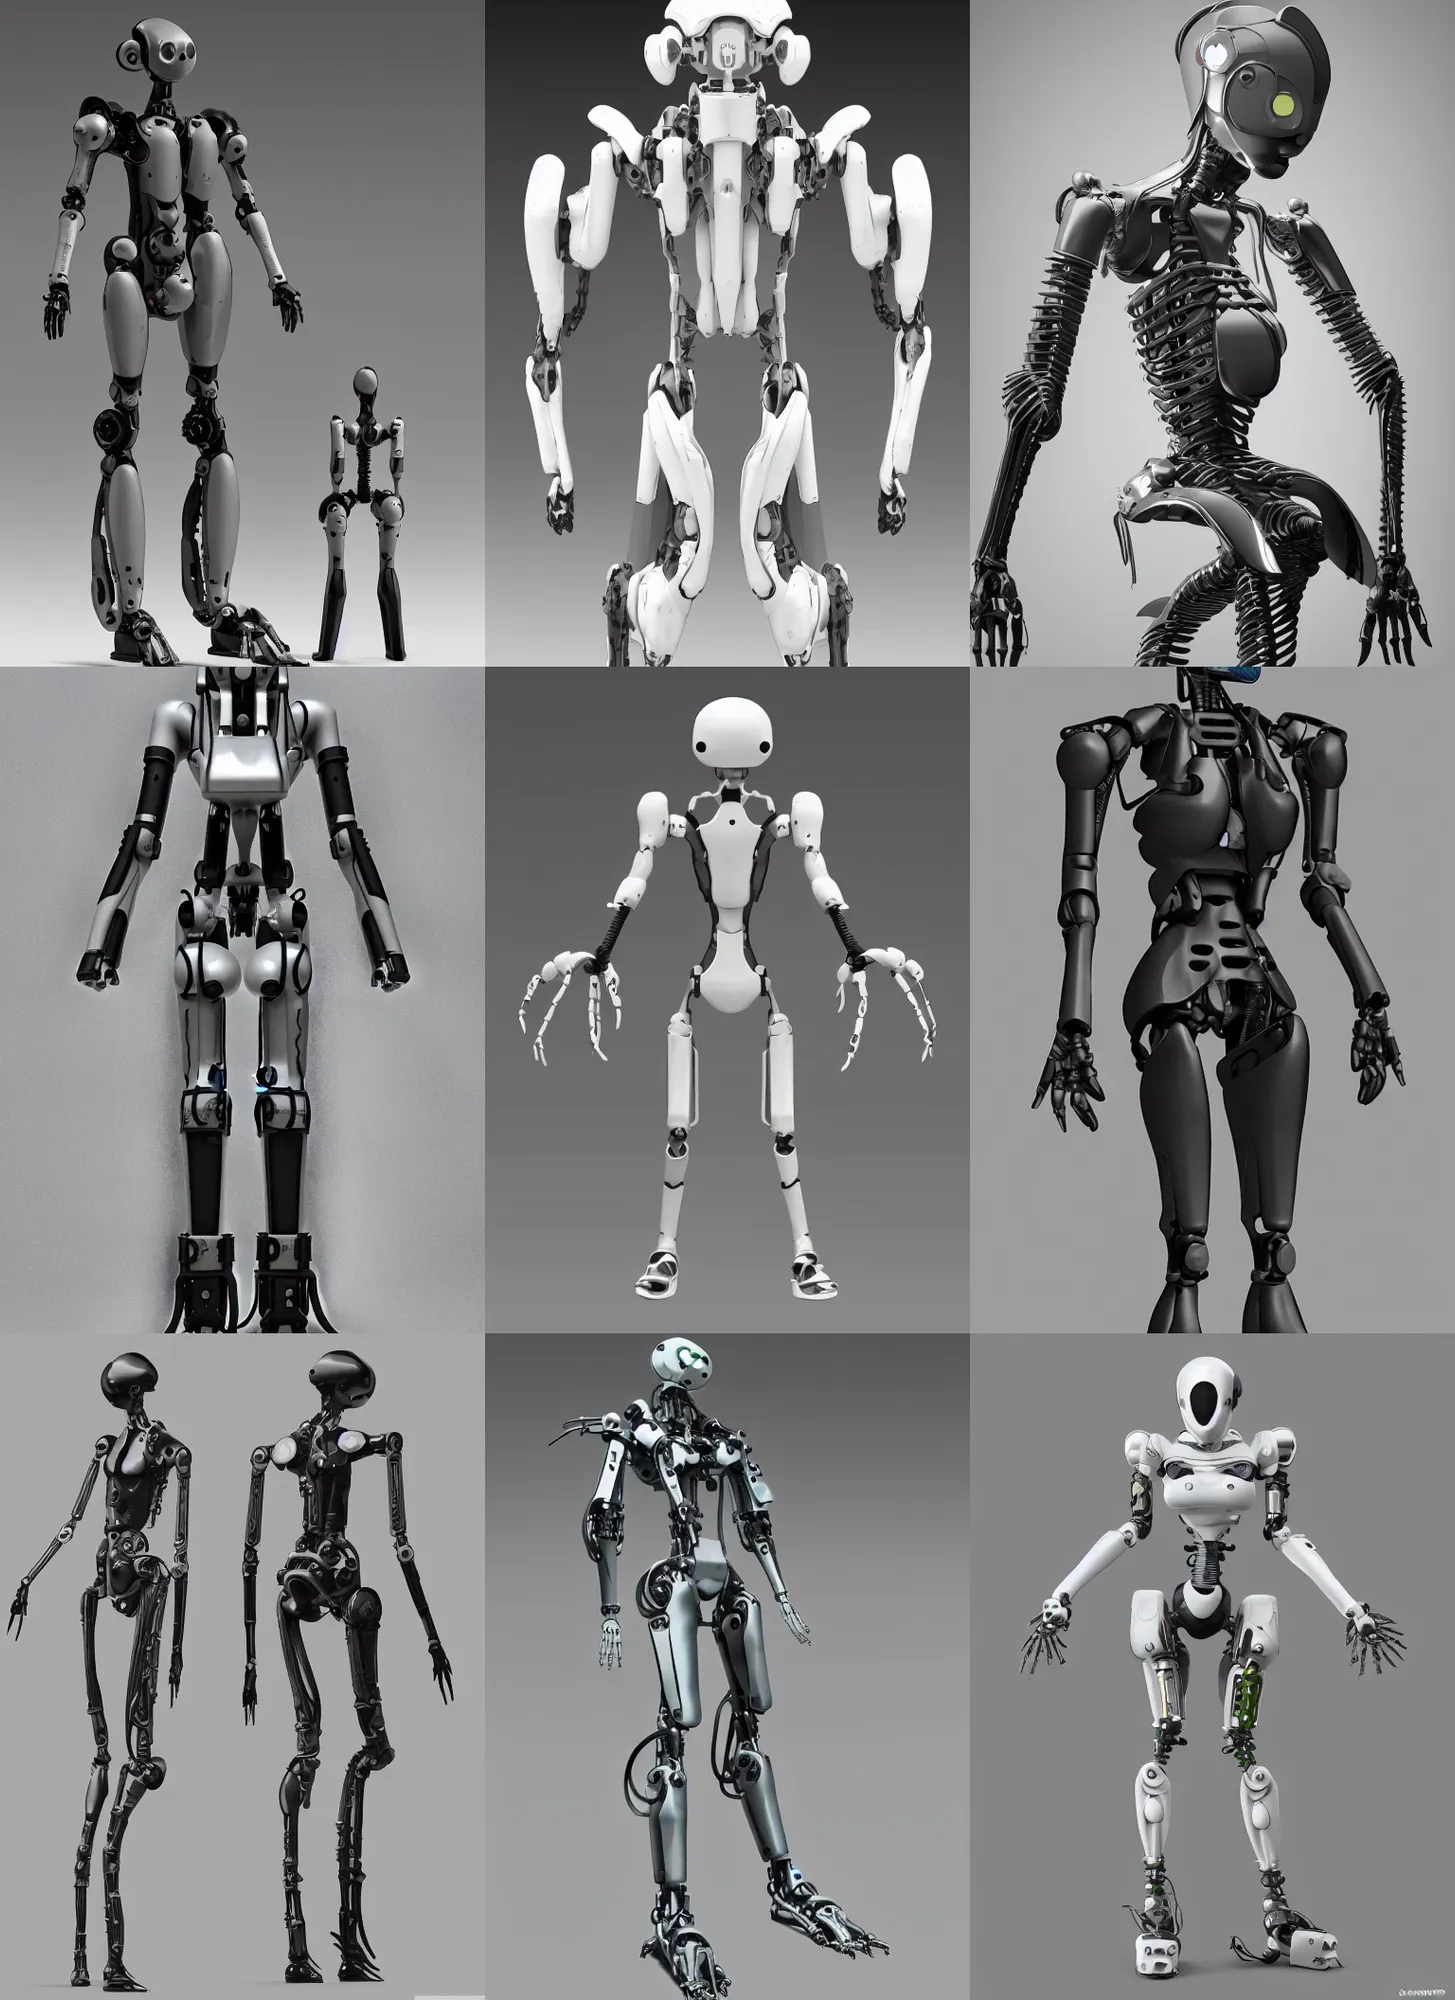 Prompt: CAD design of an elegant hardened posthuman android body modeled after industrial robots with prominent ceramic hex tile armor plates, solidworks, catia, autodesk inventor, unreal engine, photorealistic silicon life exoskeleton cad design inspired by Masamune Shirow and Tsutomu Nihei from BLAME!, product showcase, octane render 8k